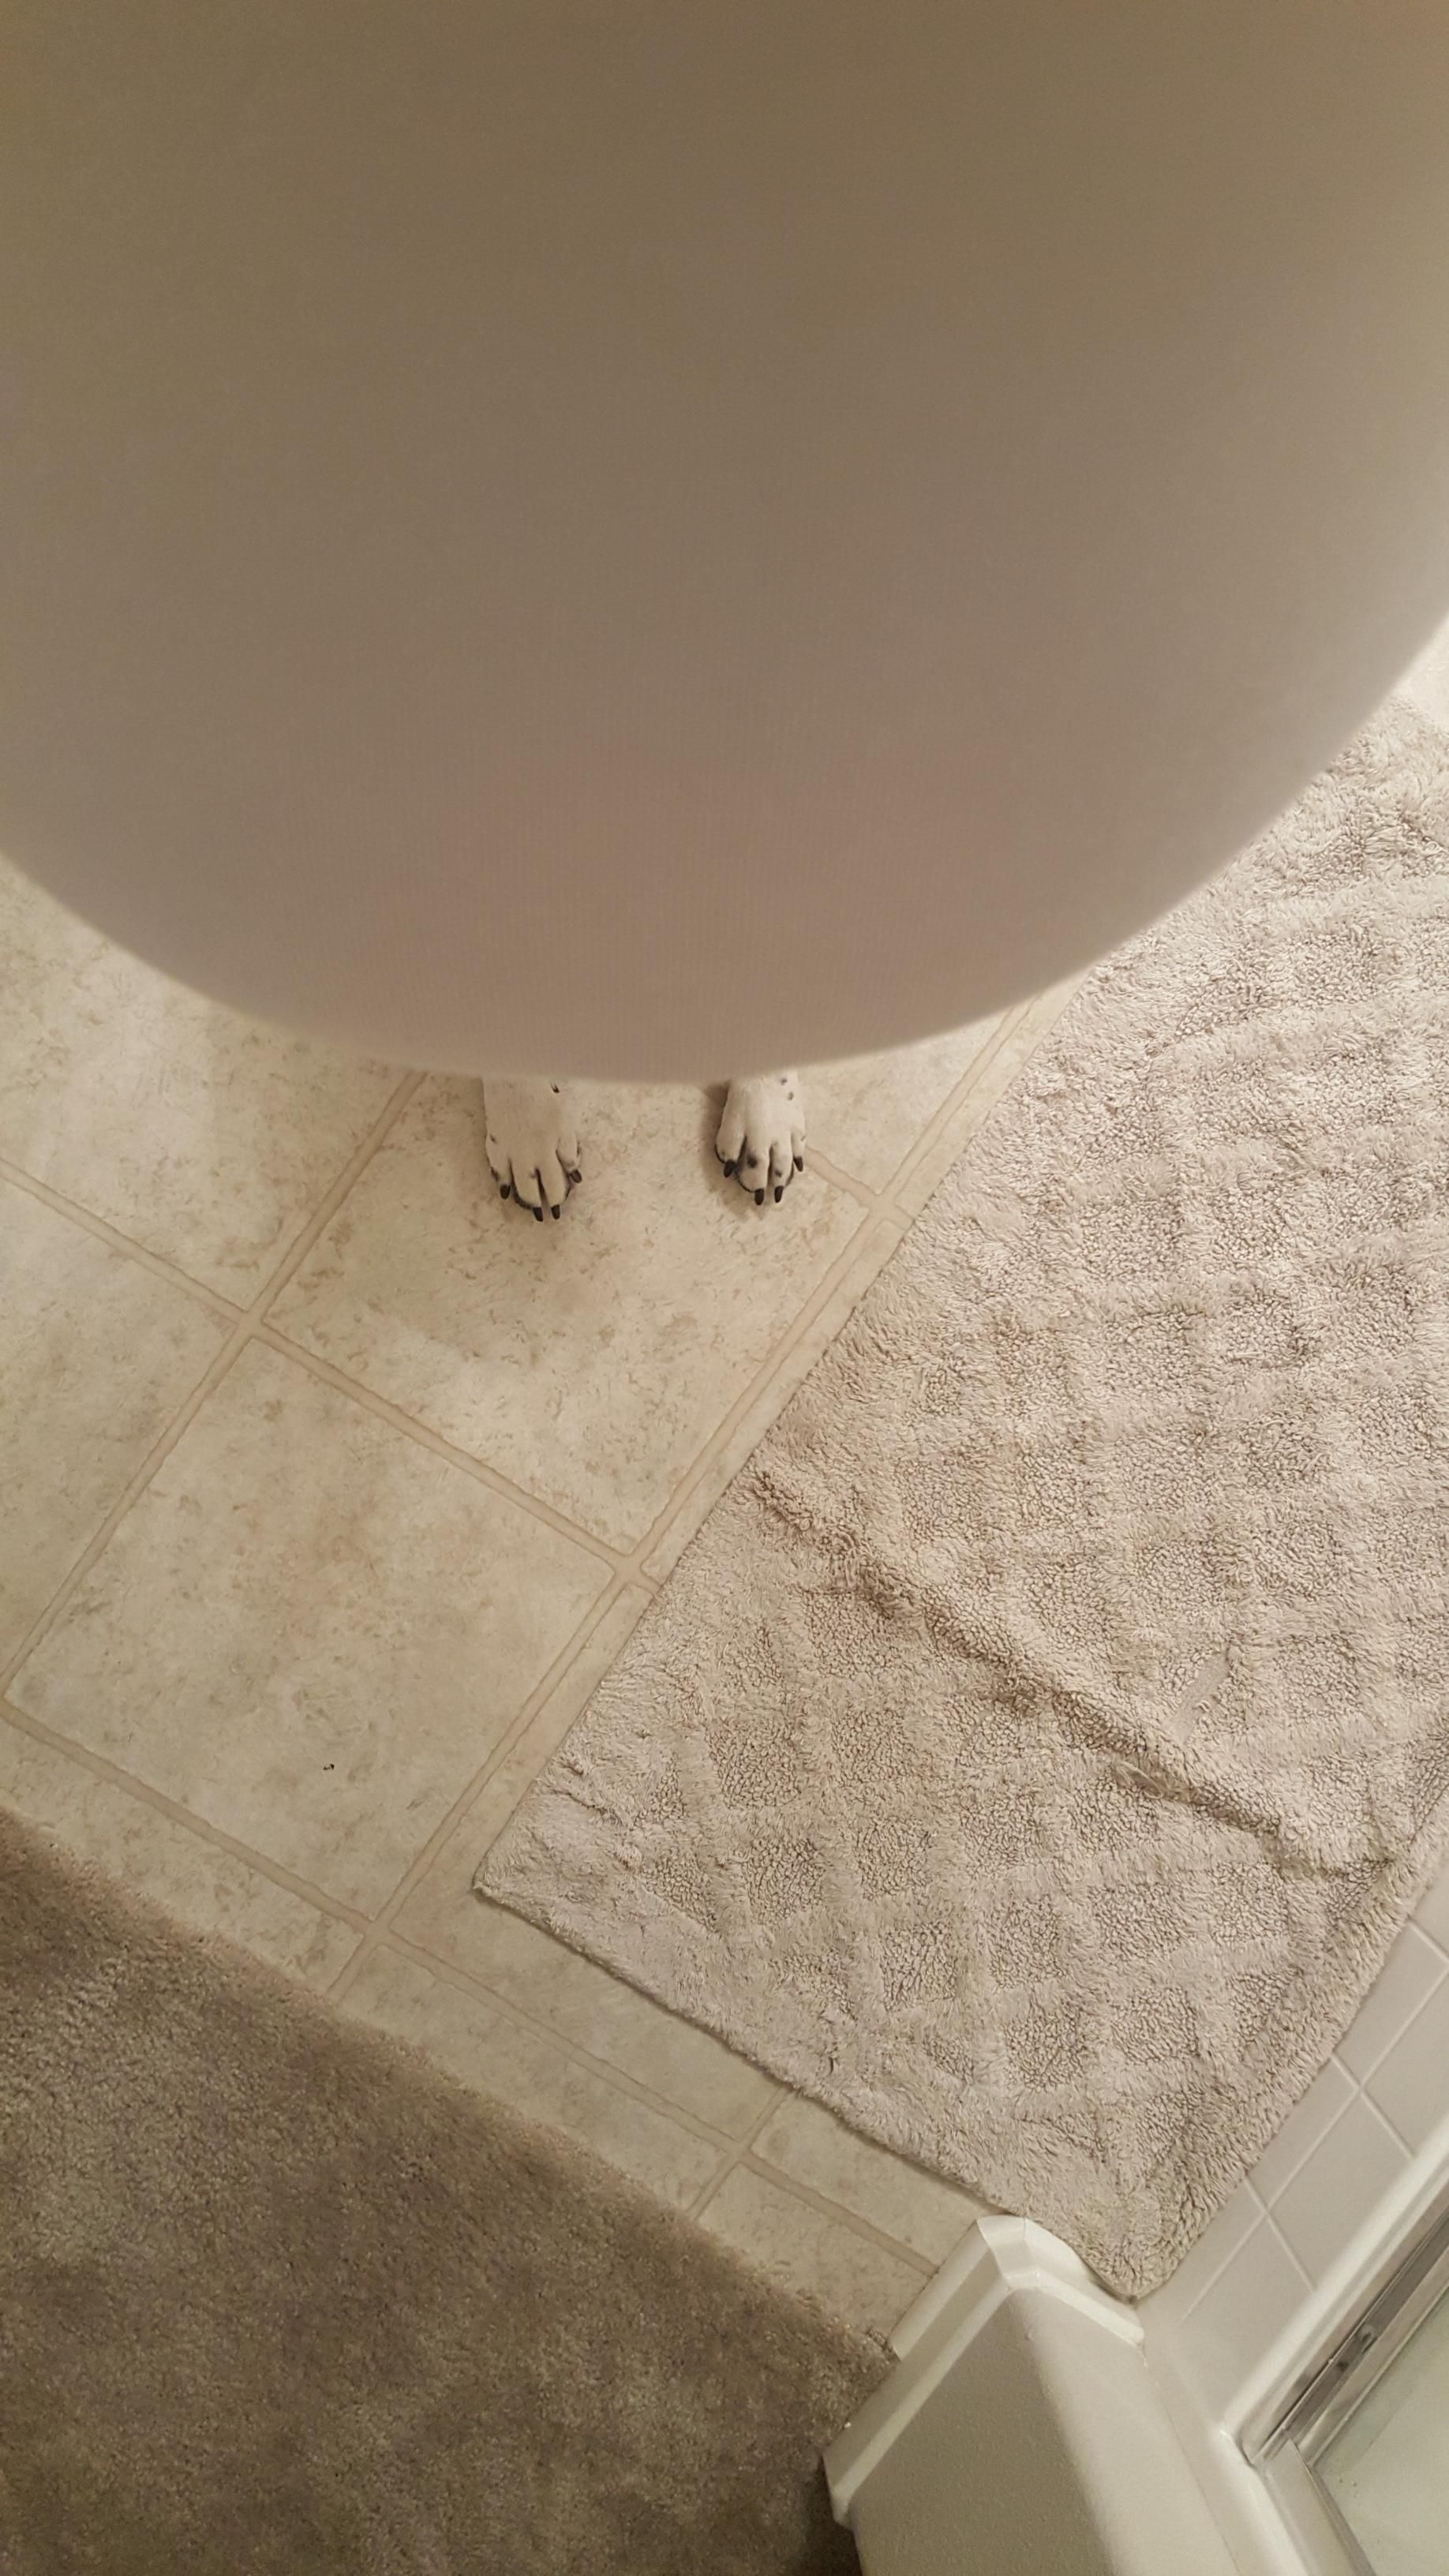 My wife is pregnant and she thought it would be funny to take a picture of our dog's feet looking like they are her's...